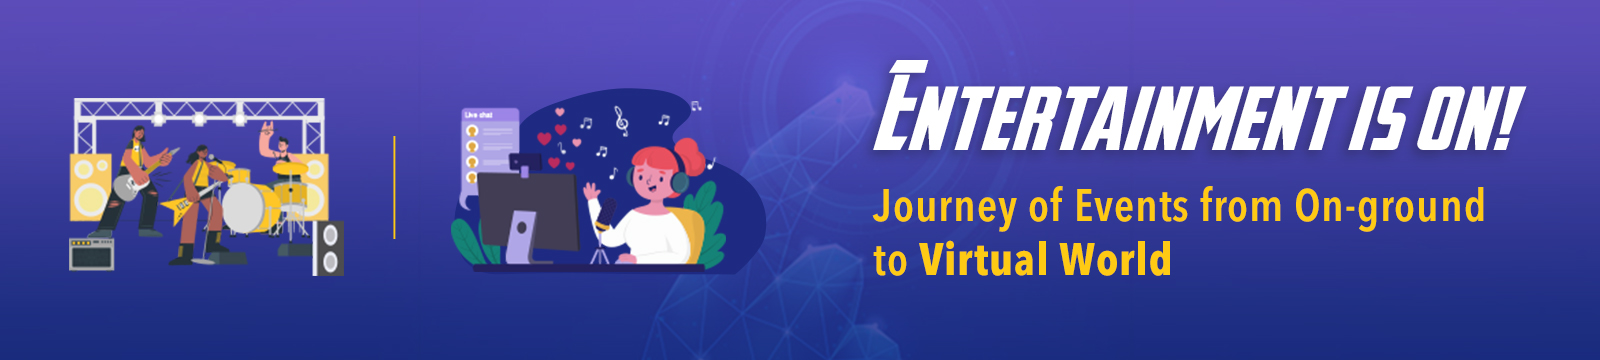 Entertainment is on! Journey of Events from On-ground to Virtual World